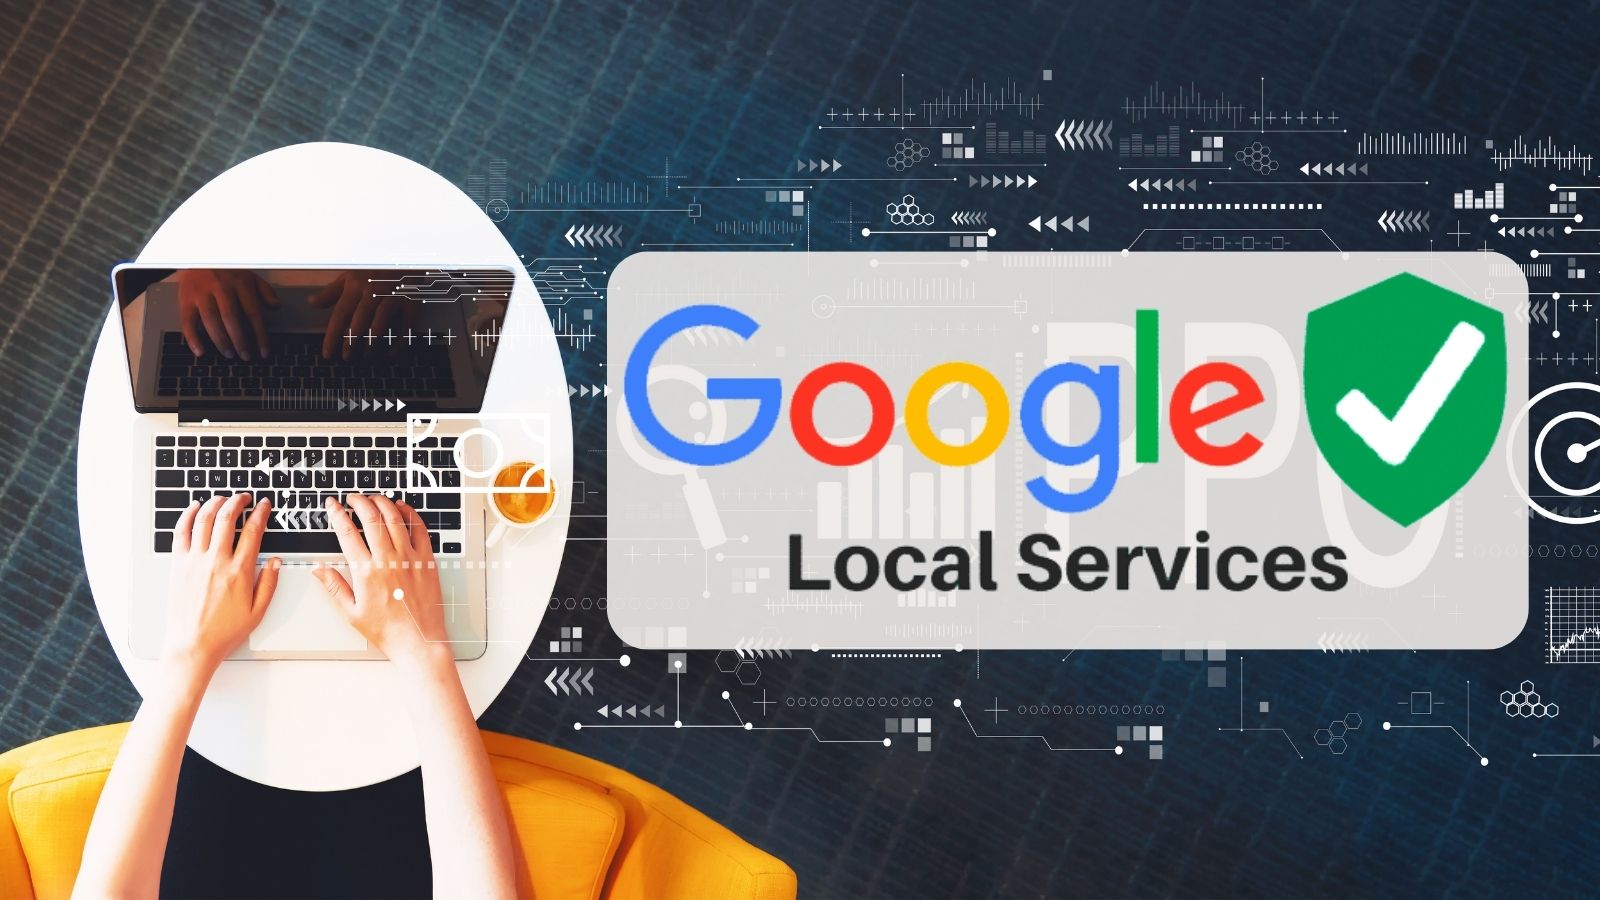 Get The Most Out Of Google Local Services